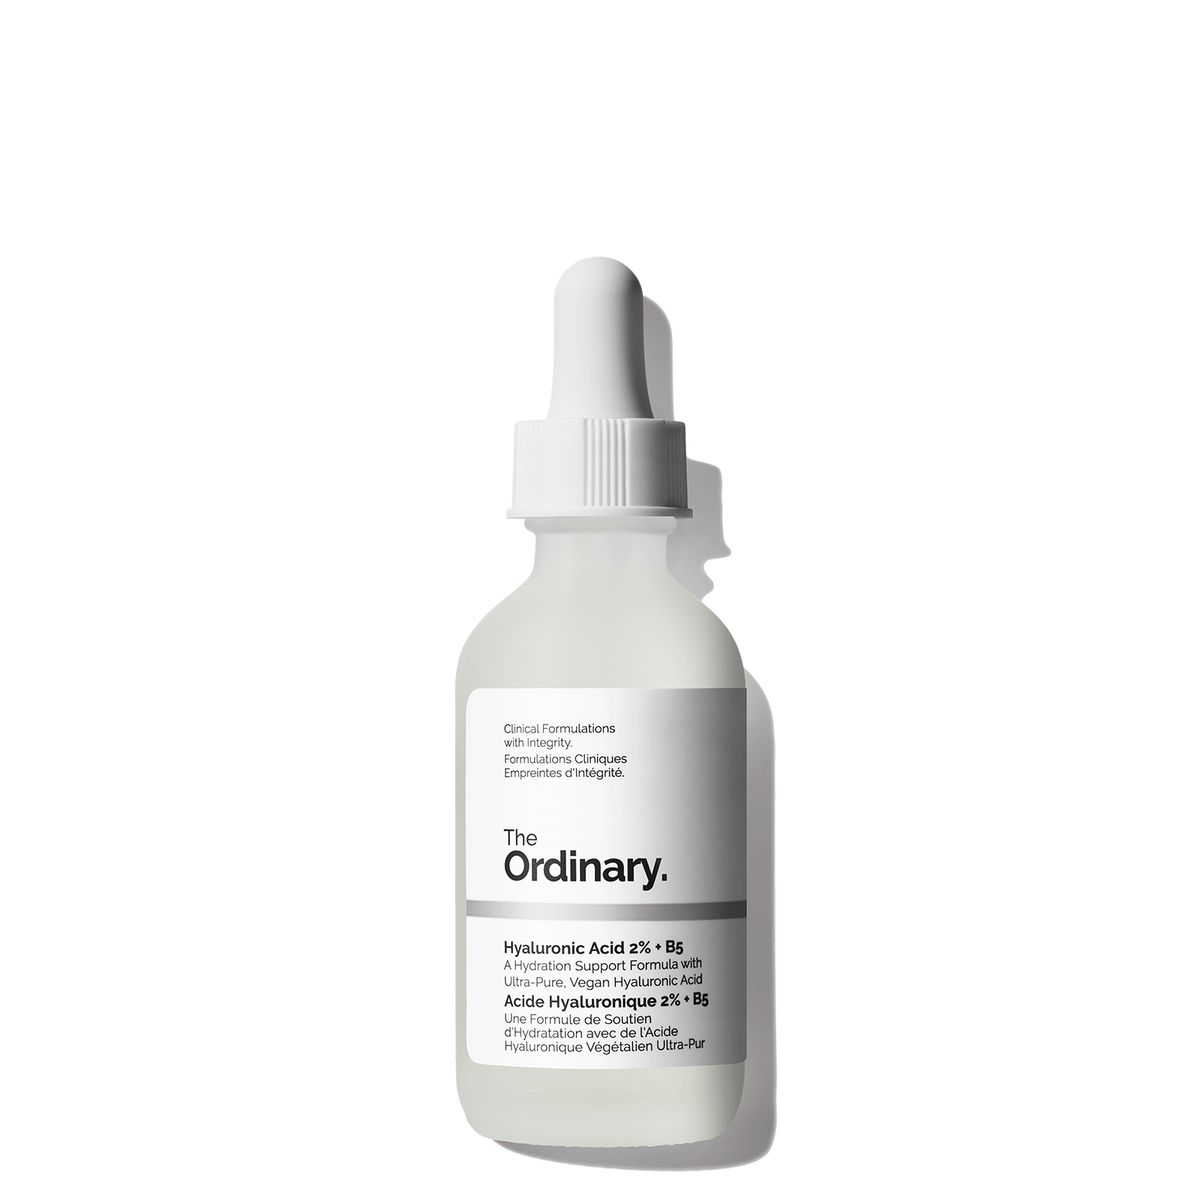 The Ordinary Hyaluronic Acid 2% + B5Hyaluronic Acid 2% + B5 | The Ordinary